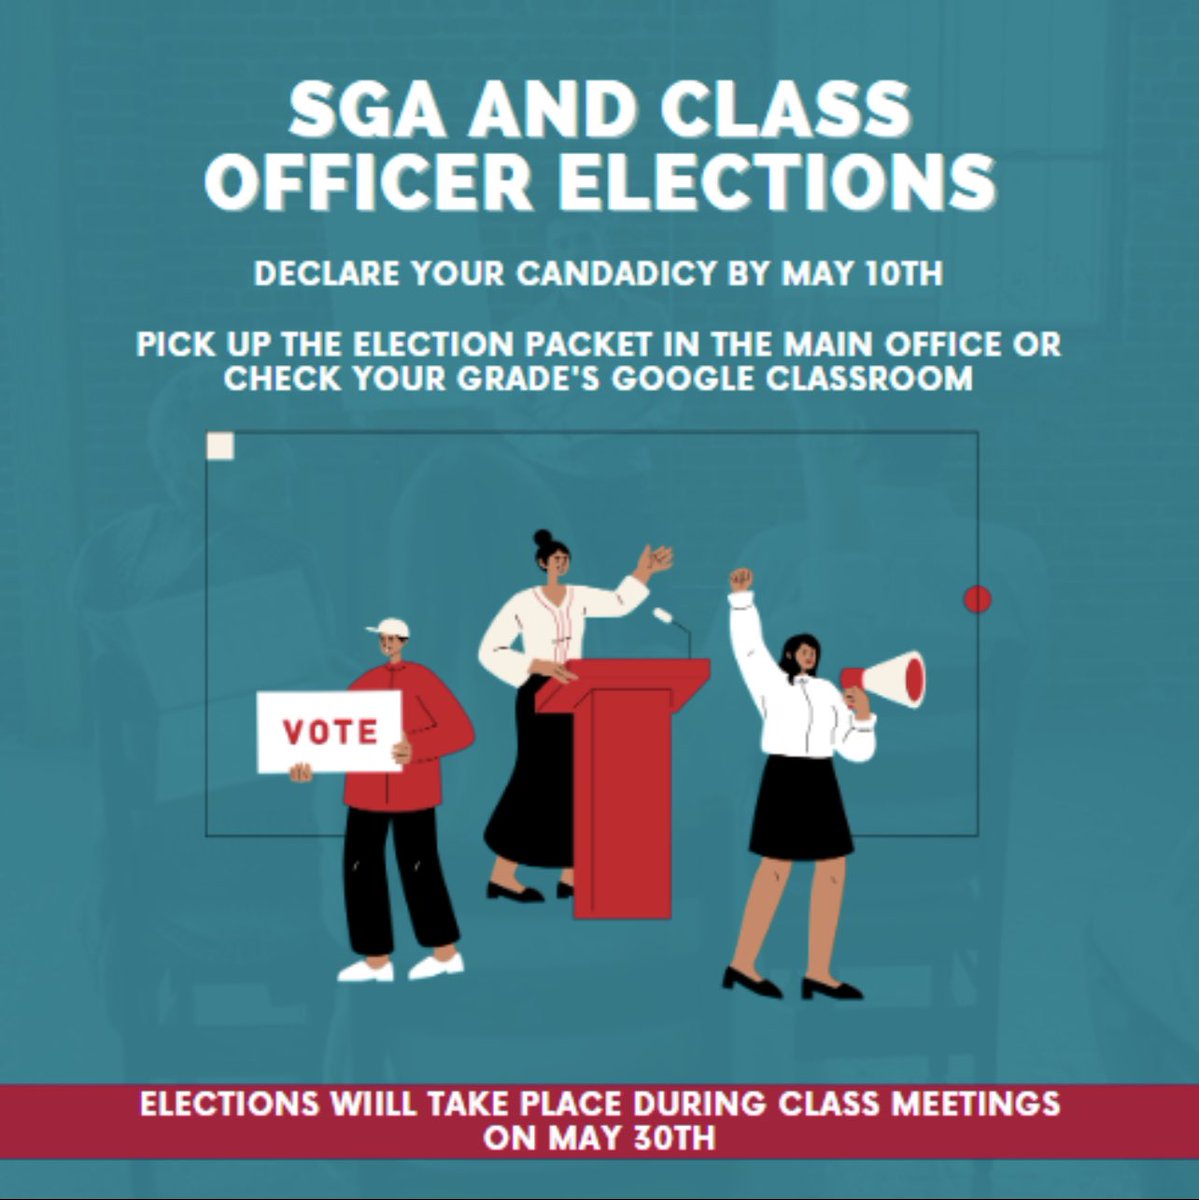 Are you interested in running for a class officer or SGA officer position for next school year? Election packets are now available in the main office. You must declare your candidacy by May 10. Elections will take place on May 30th. @rfh_ad @RFH_Regional